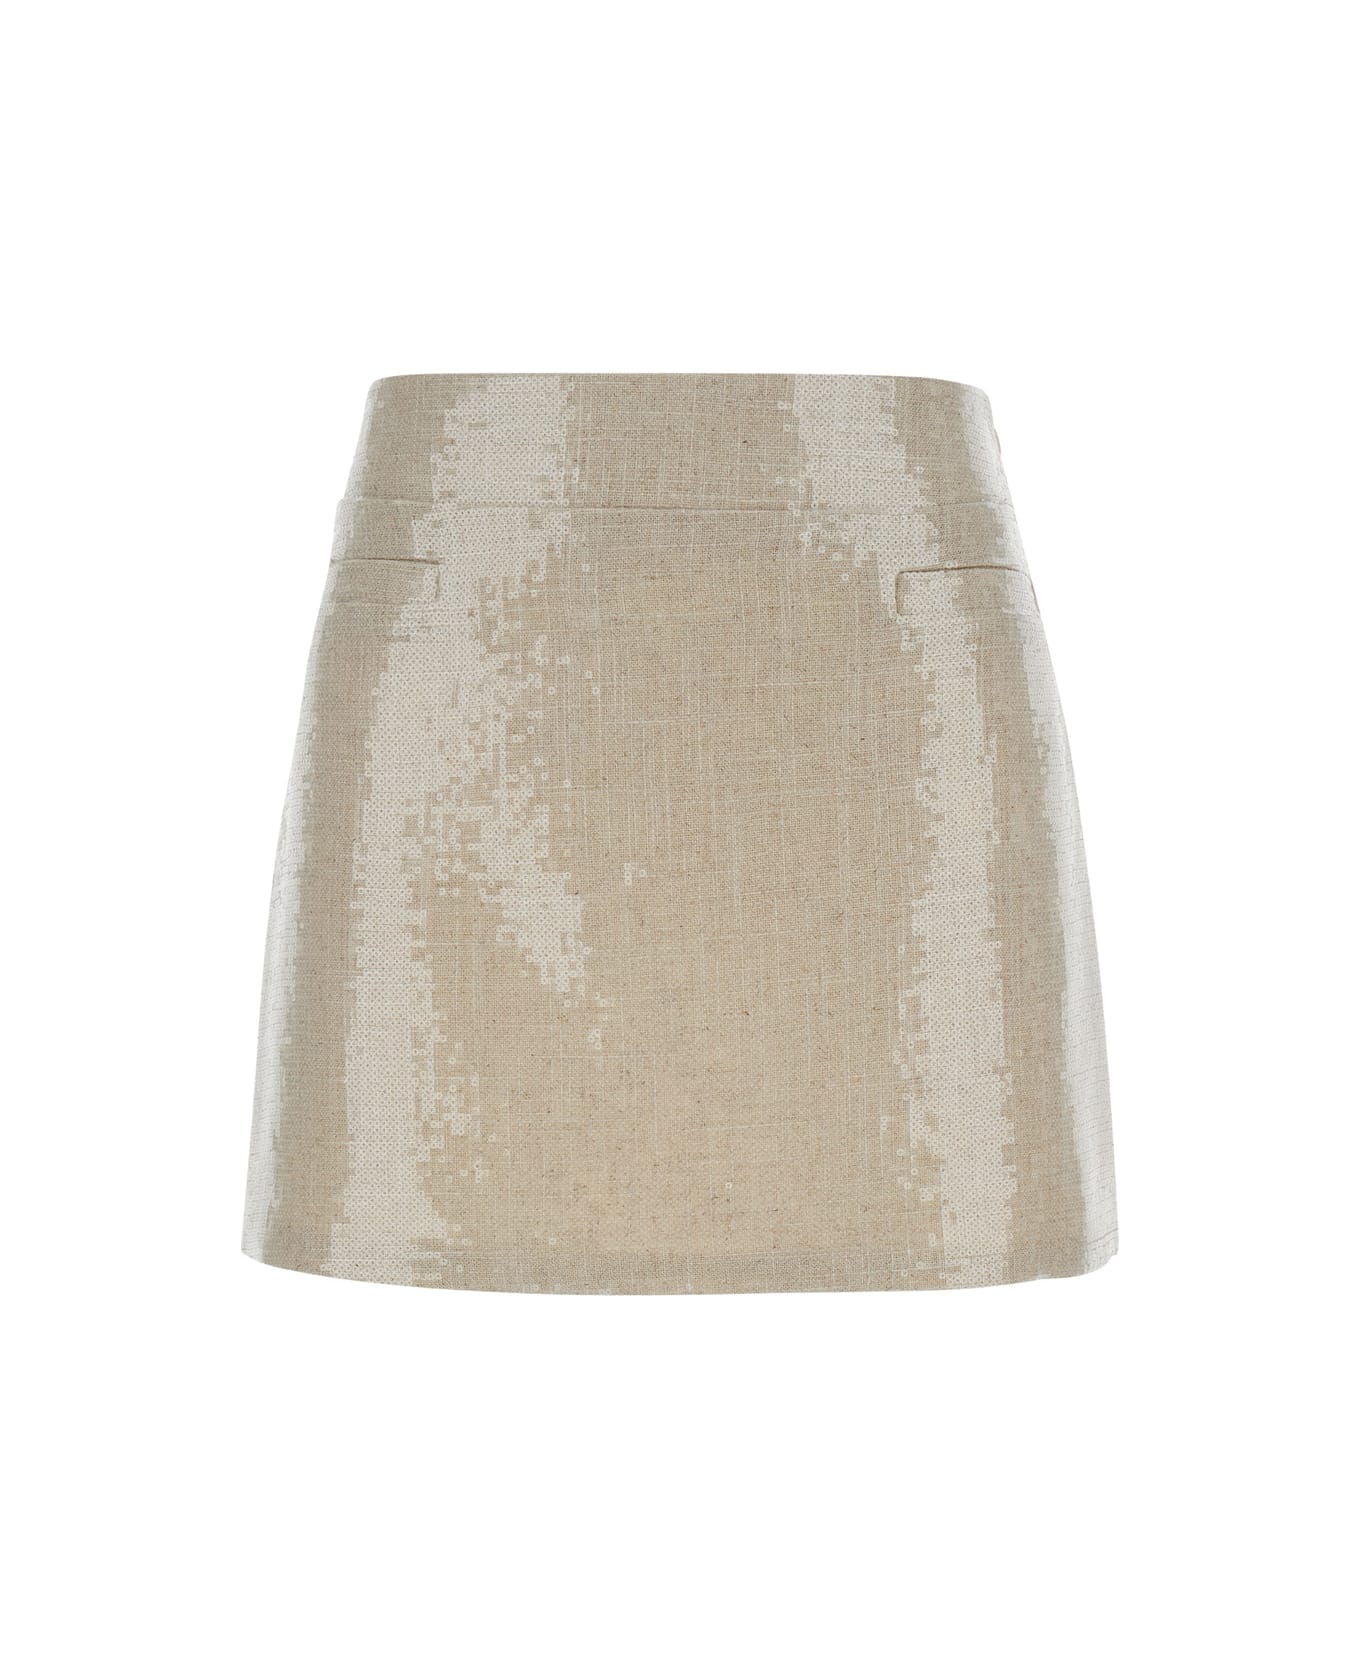 Federica Tosi Biege Mini Skirt With Sequins In Linen Blend Woman - Beige スカート